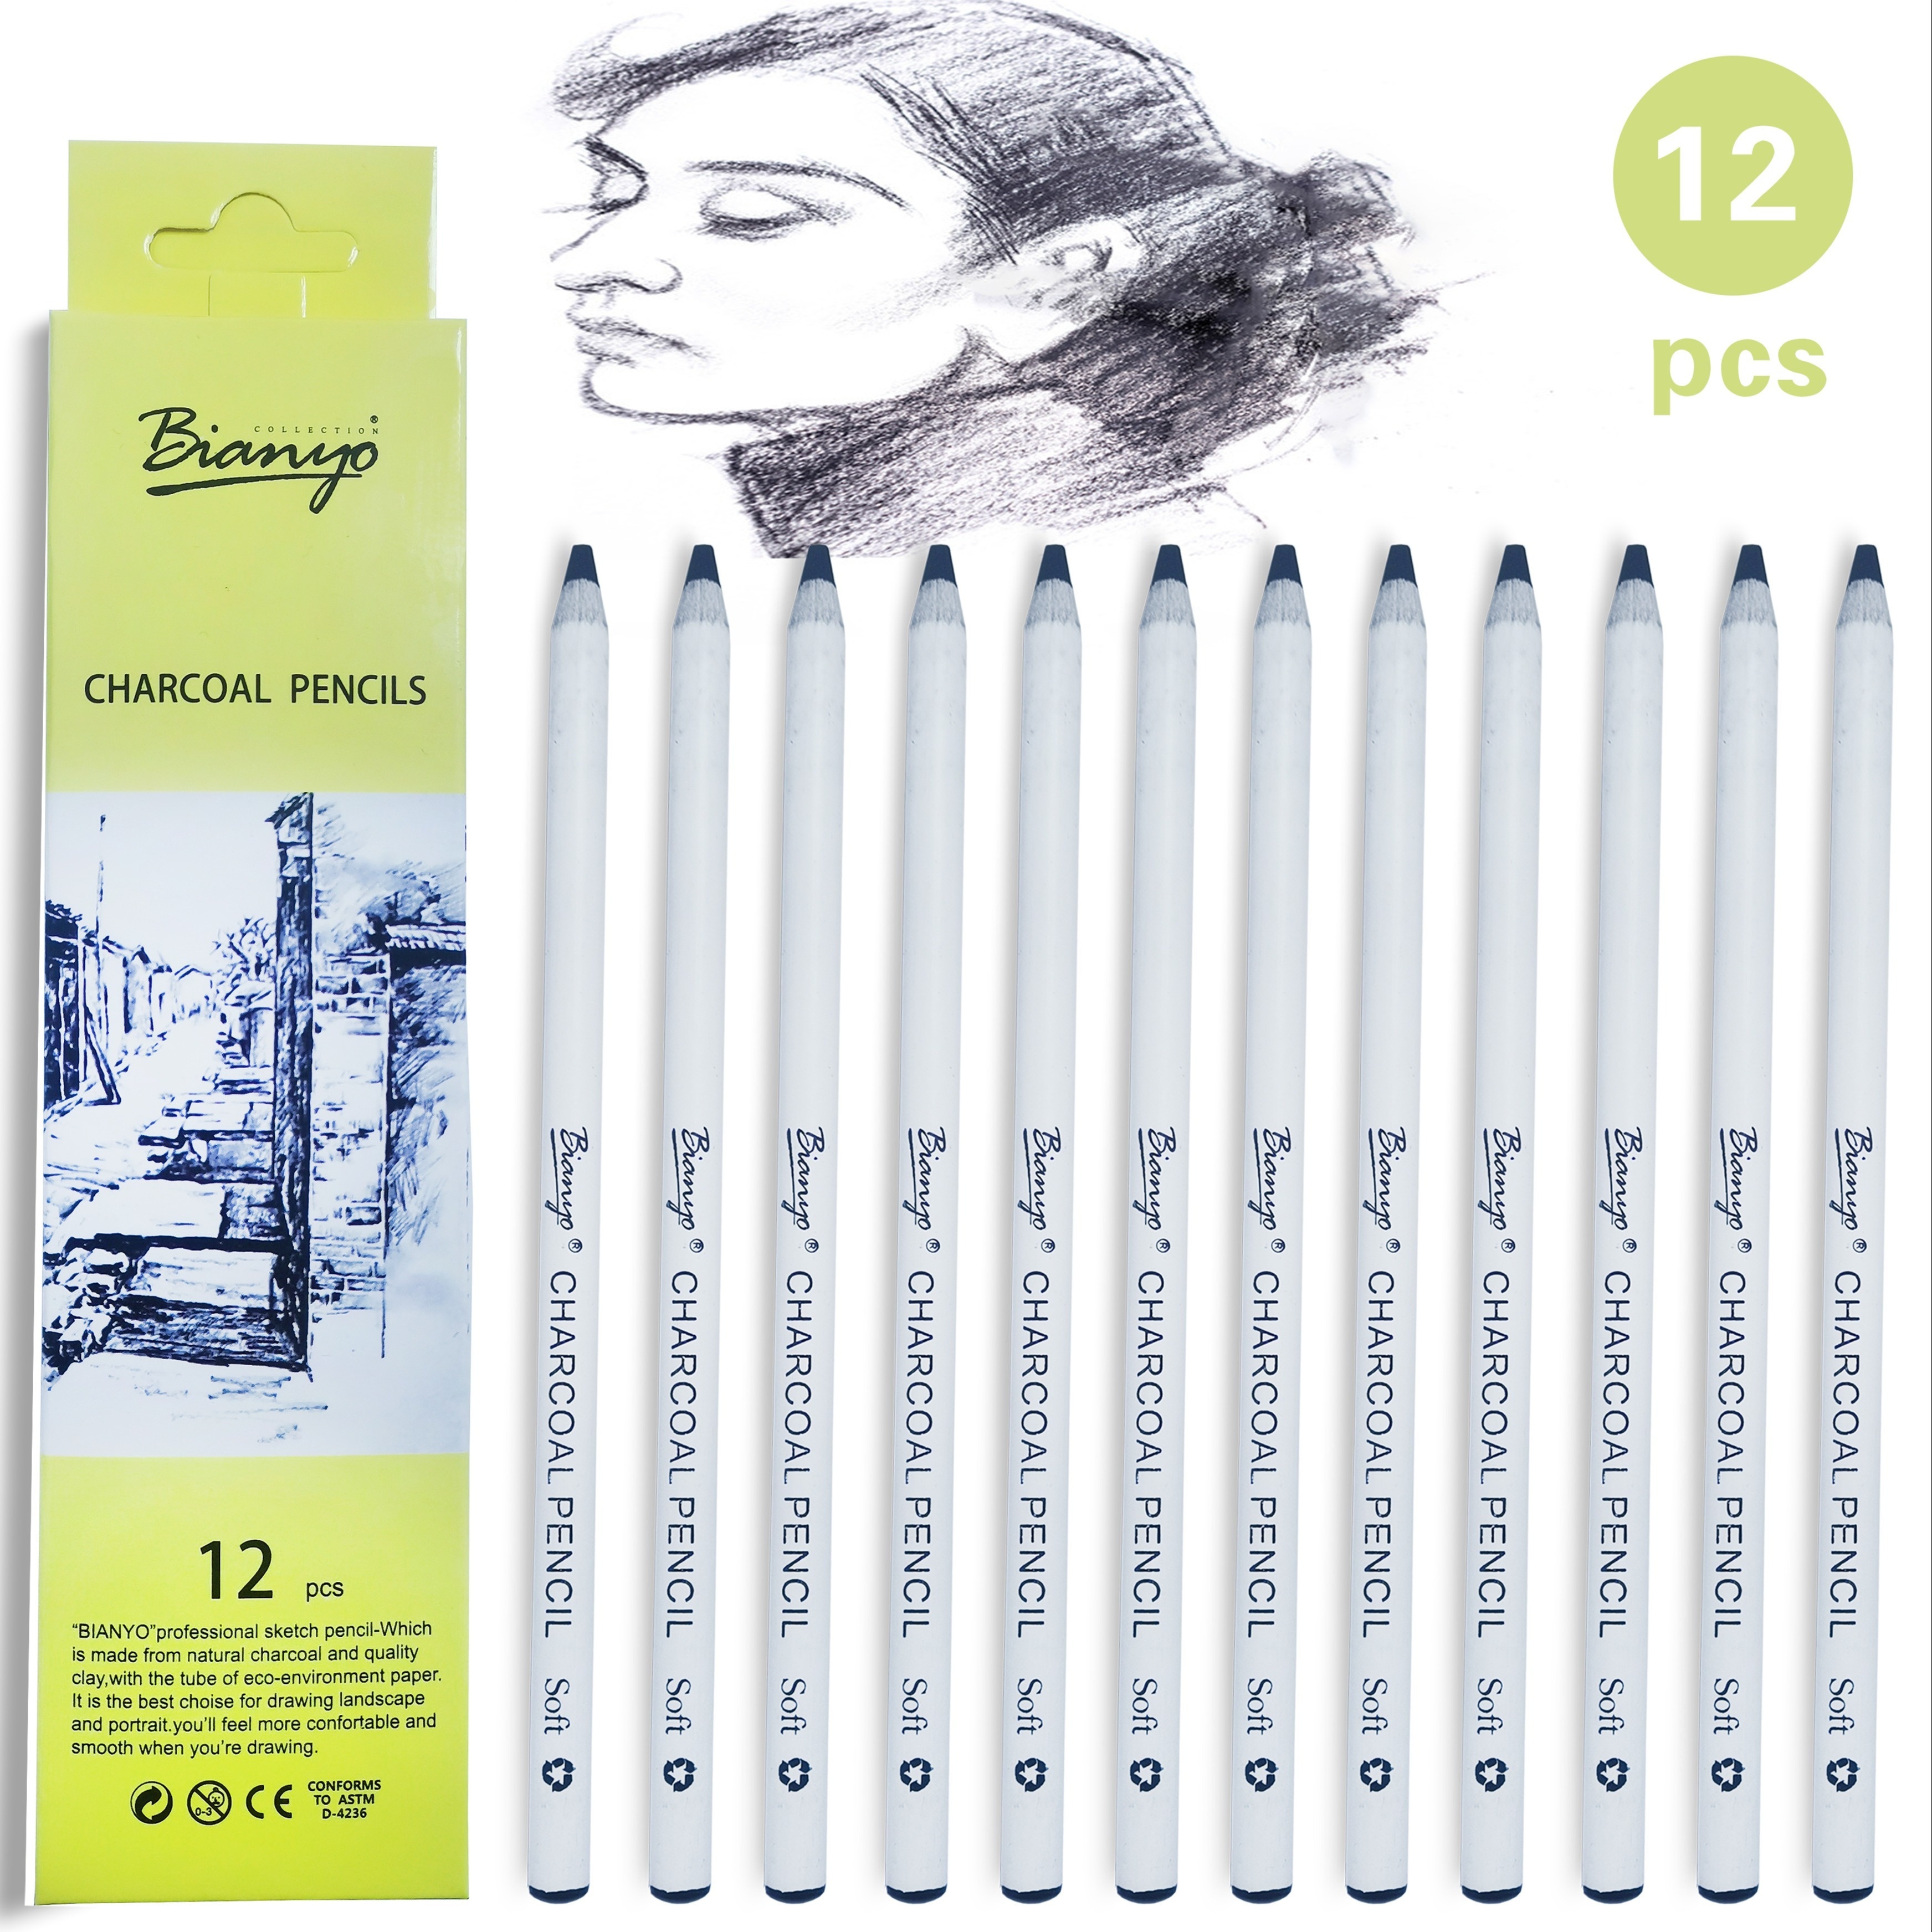 Marie's Soft Charcoal Pencils Paper Wrapped, Box of 12